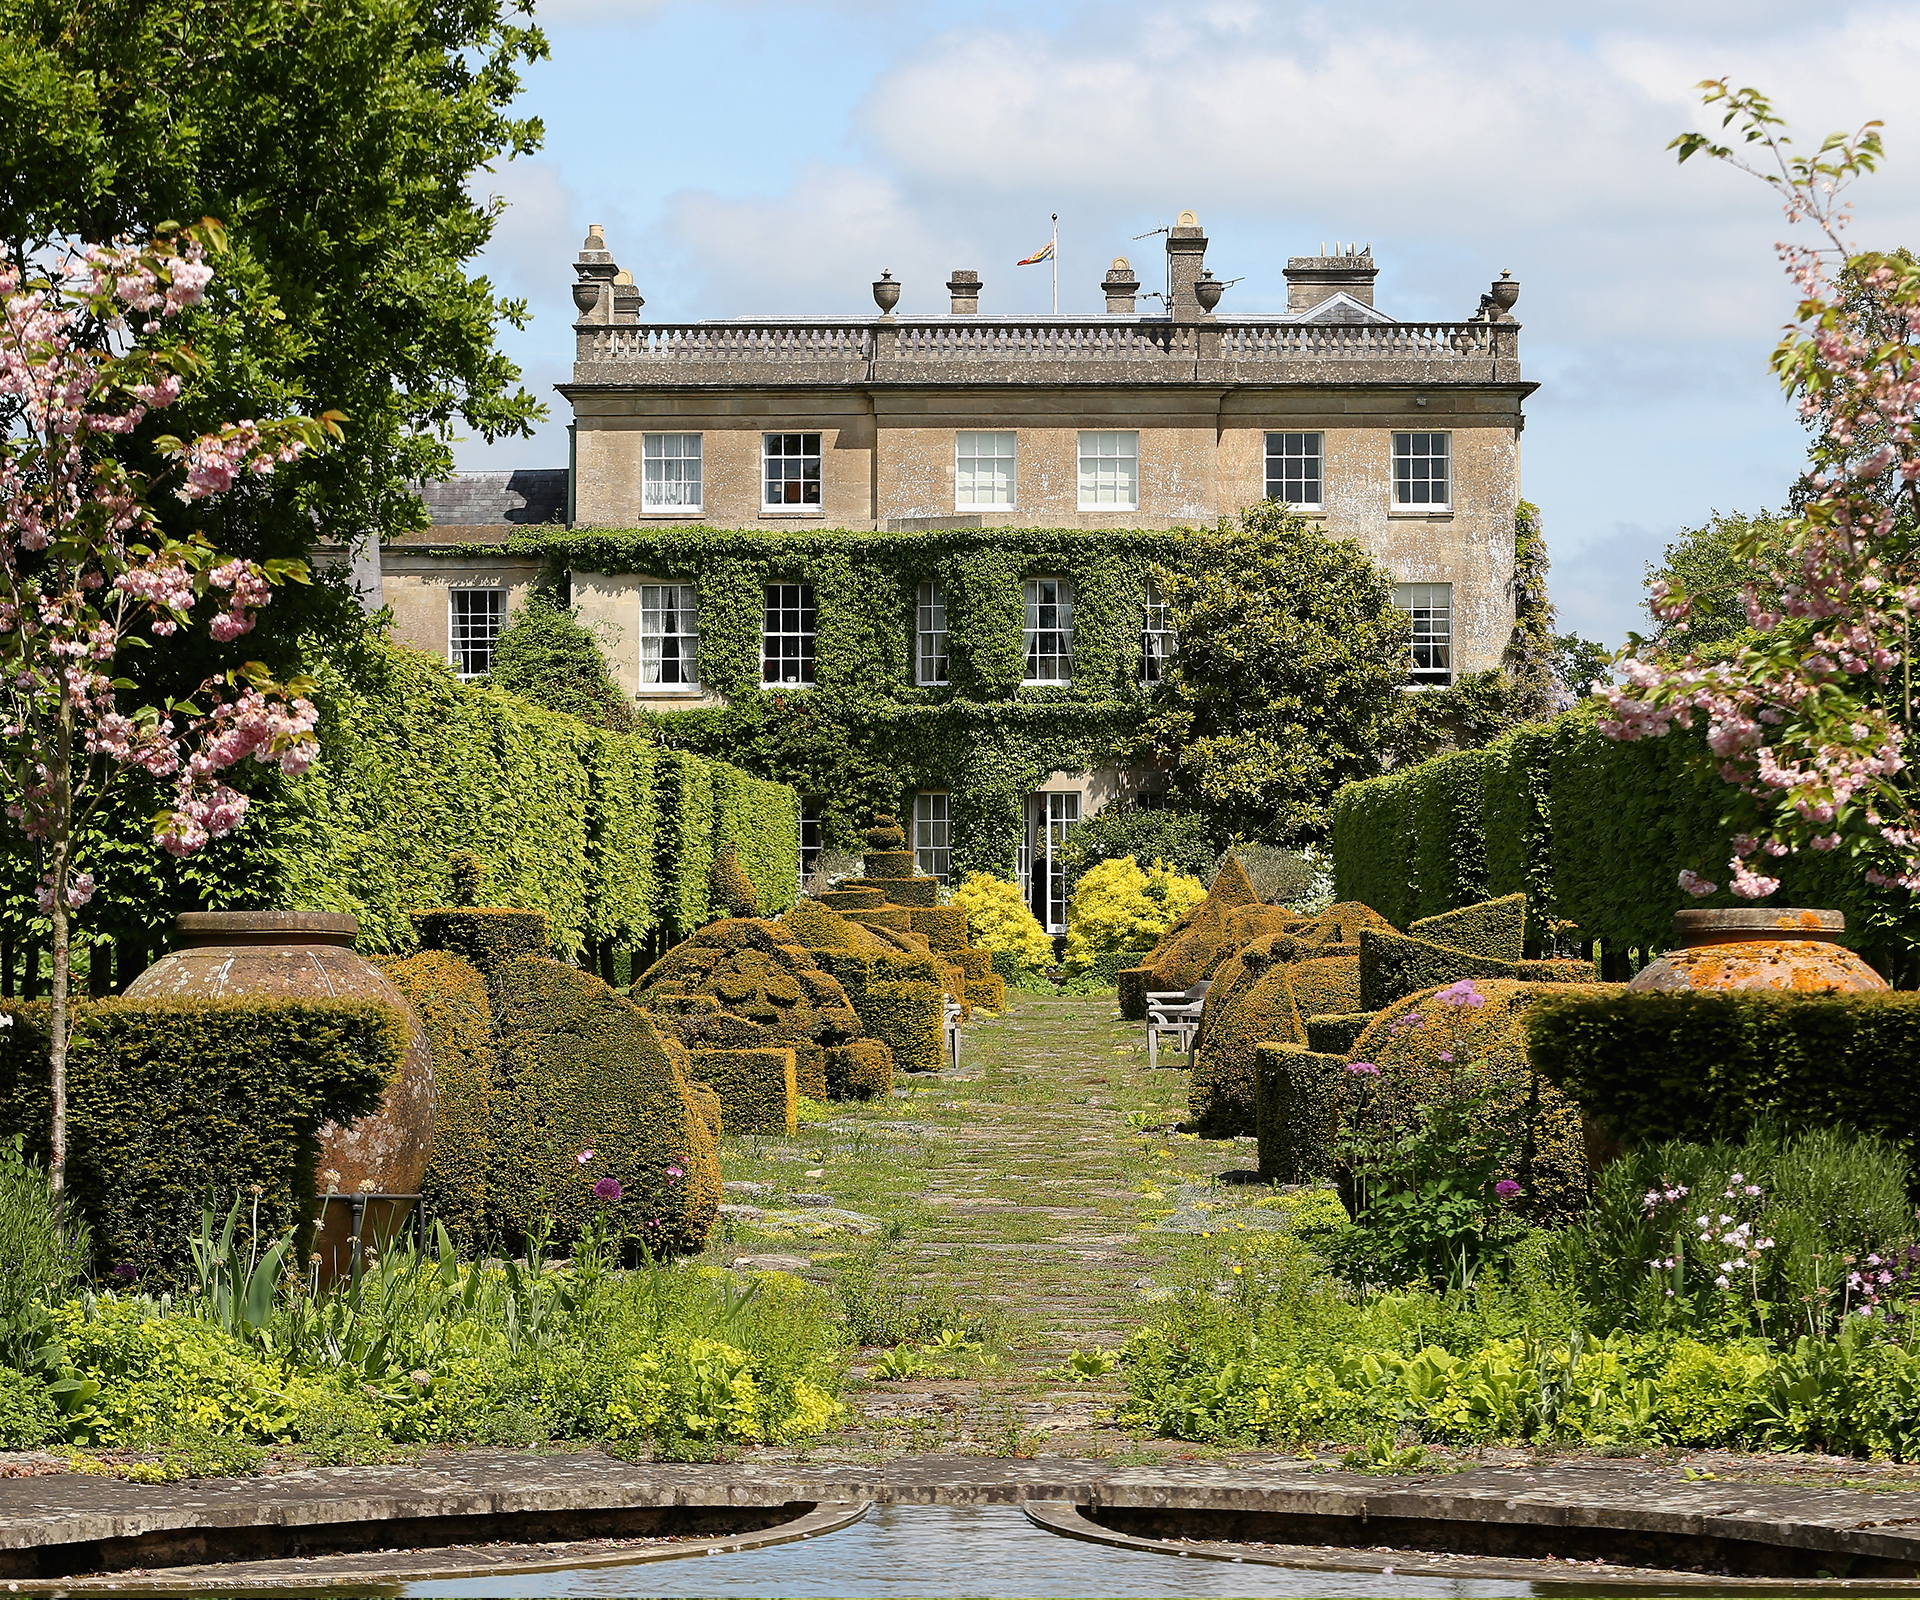 Highgrove House, homes owned by the British royal family